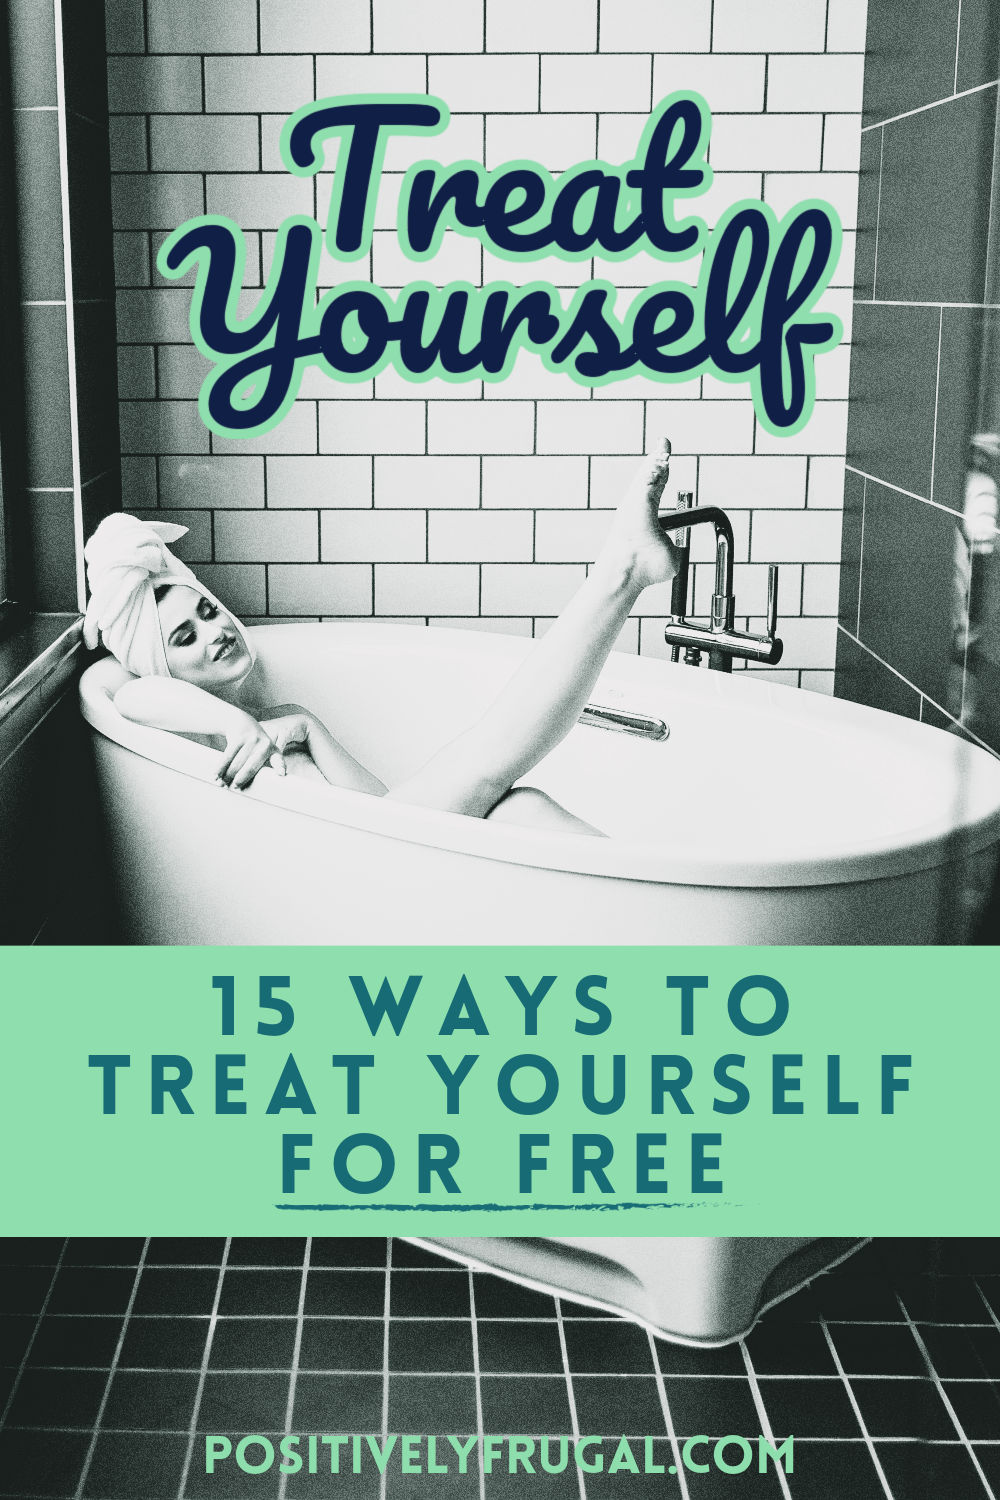 15 Ways To Treat Yourself for Free by PositivleyFrugal.com